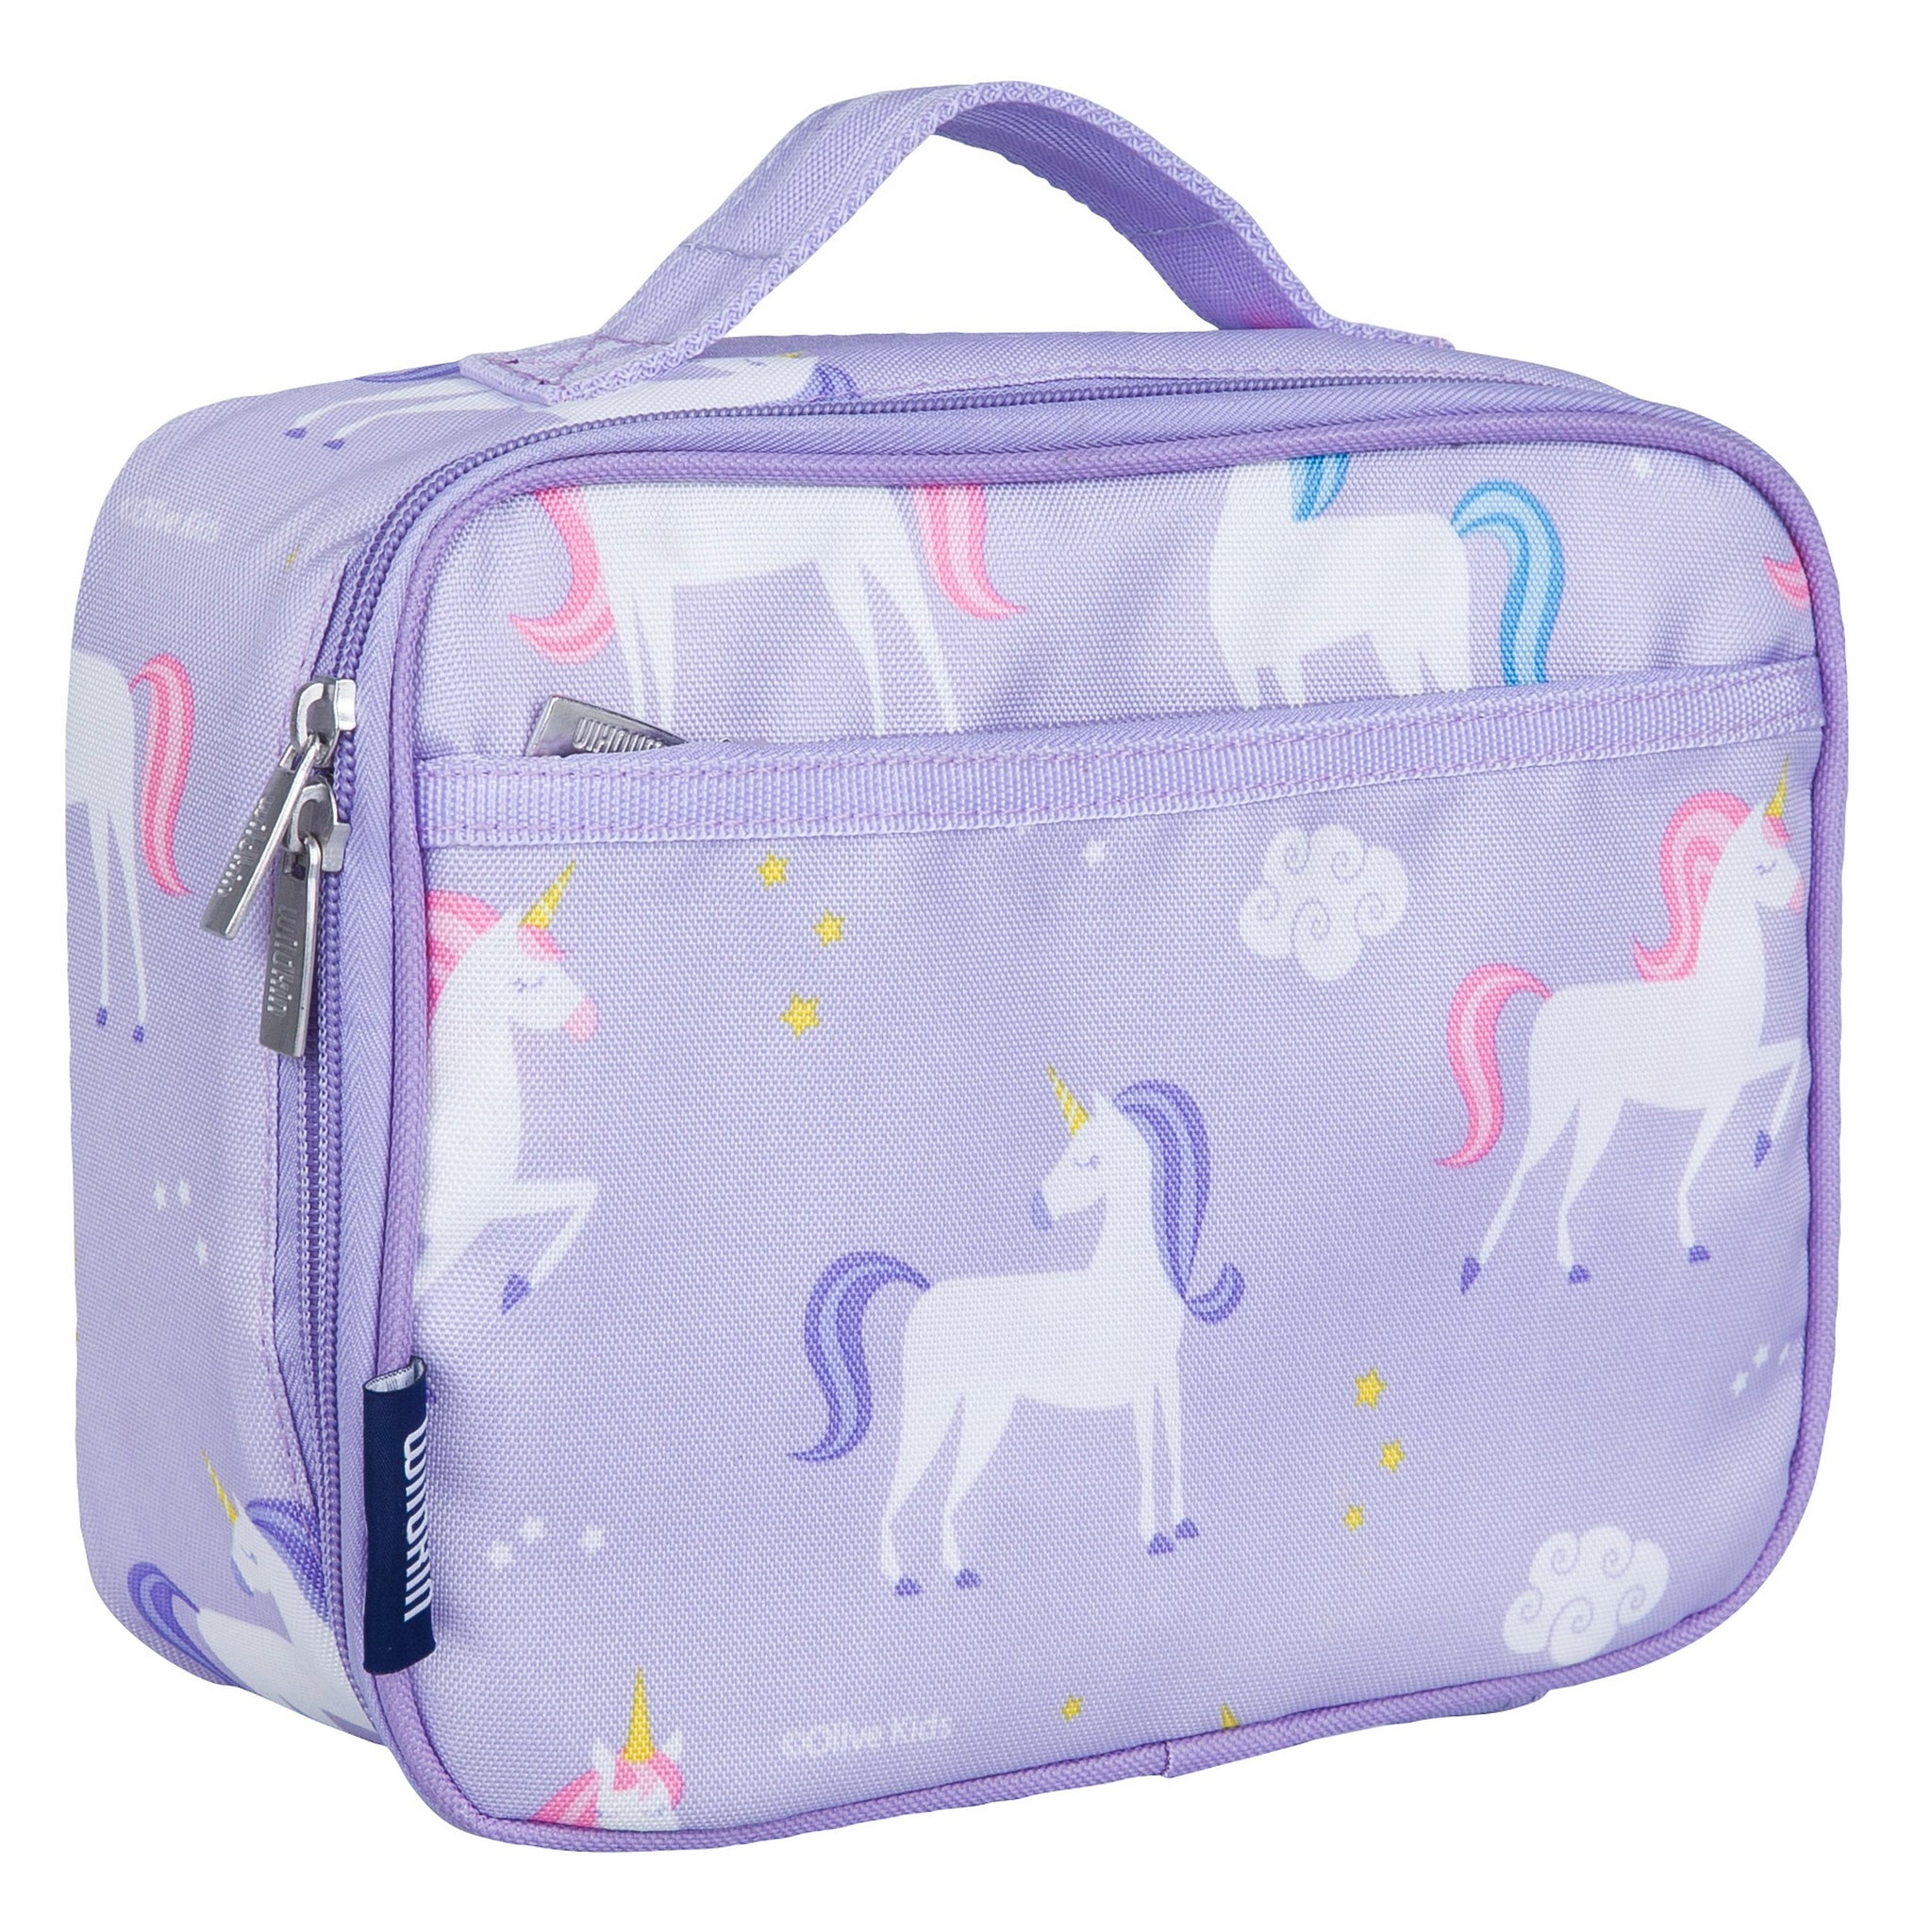 COO&KOO Unicorn Lunch Box Lunch Bag Set - Insulated Lunch Bag with